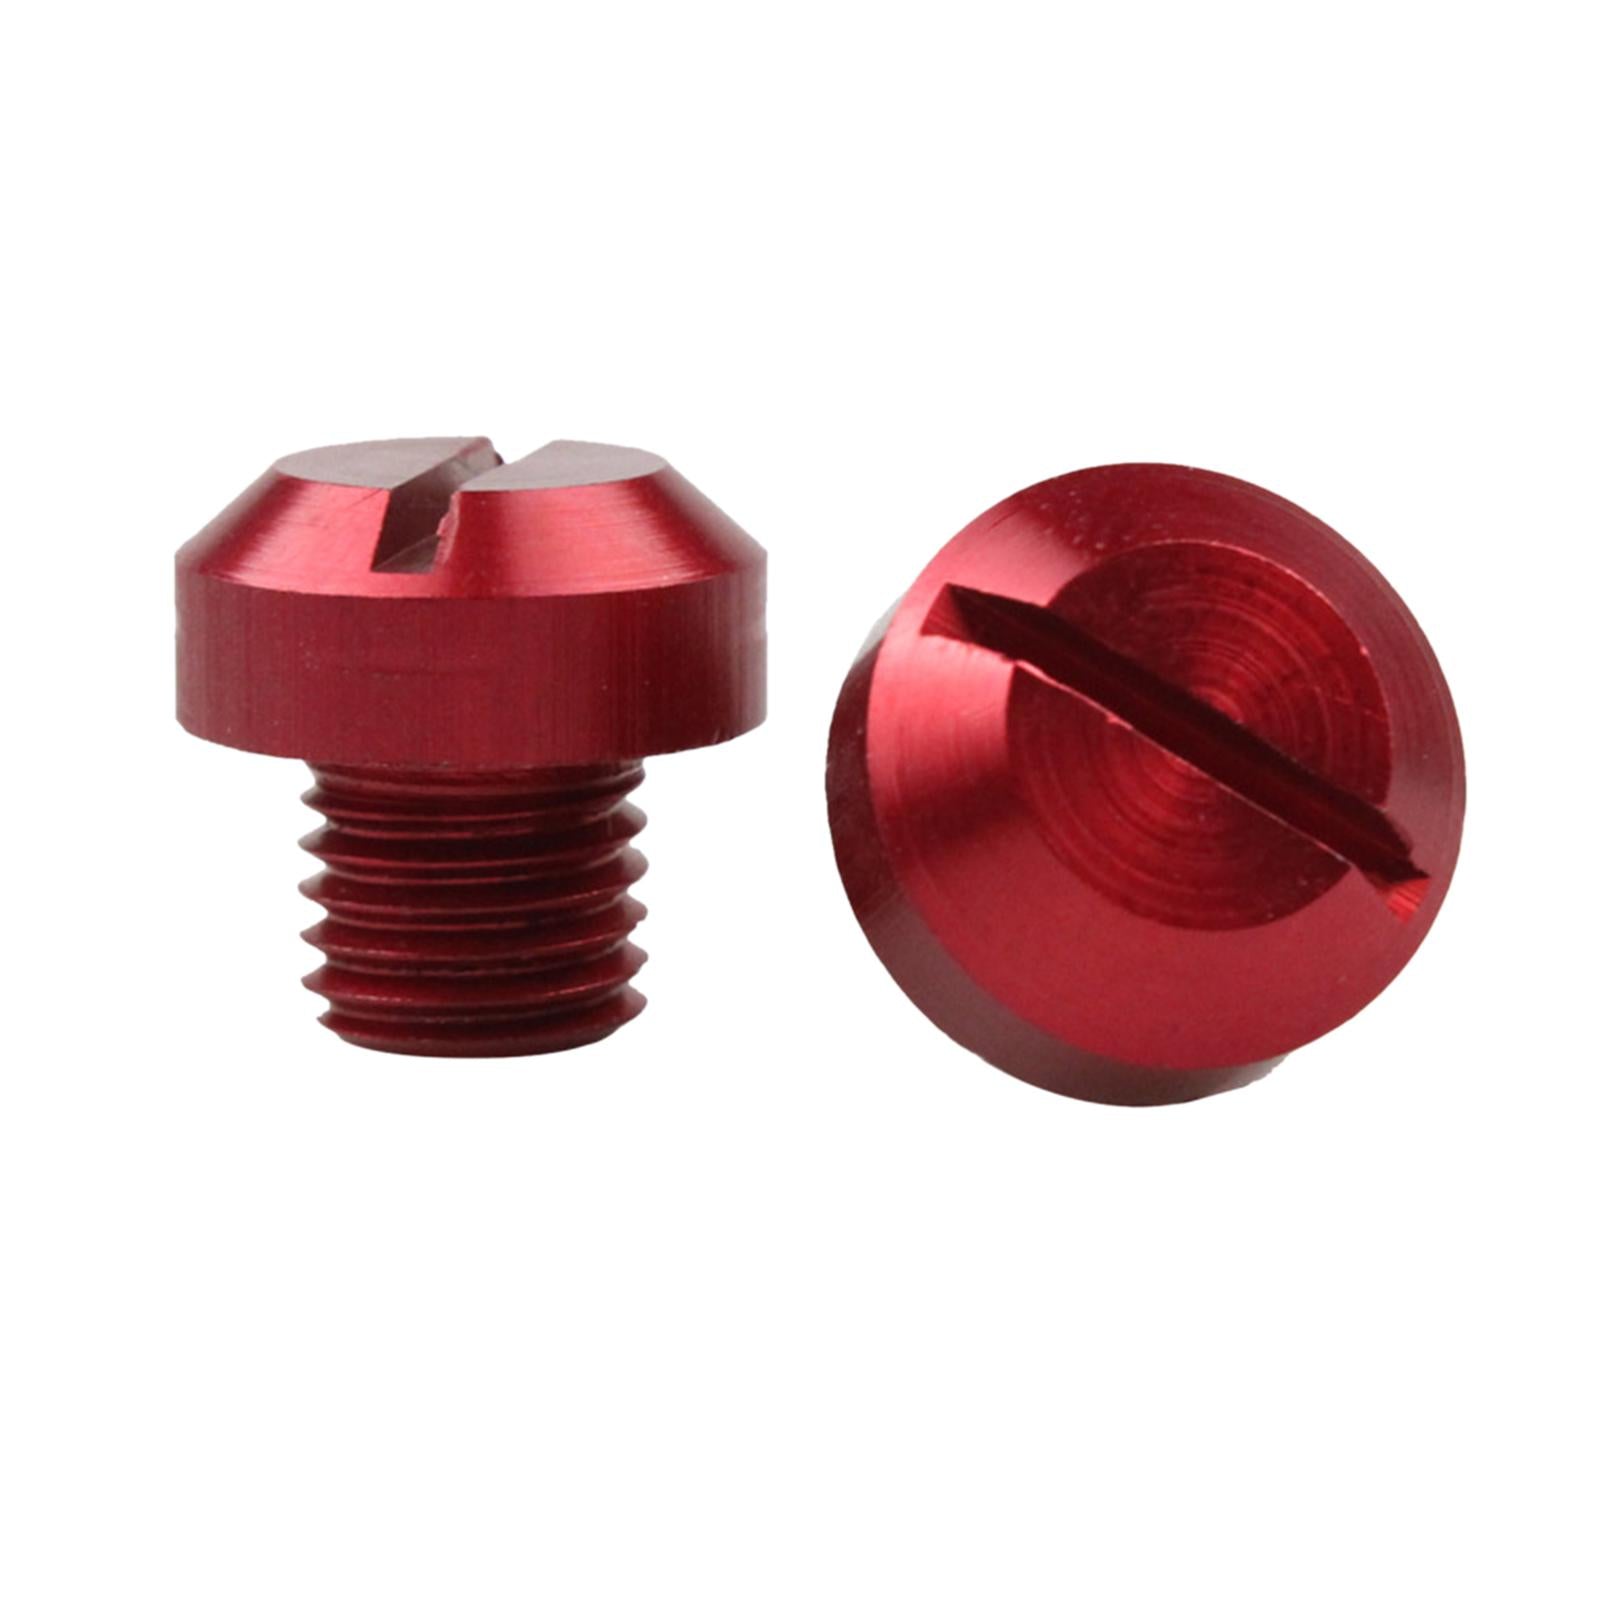 2 Pcs M10x1.25 Rearview Mirrors Thread Hole Plug Screw Bolts Red Positive